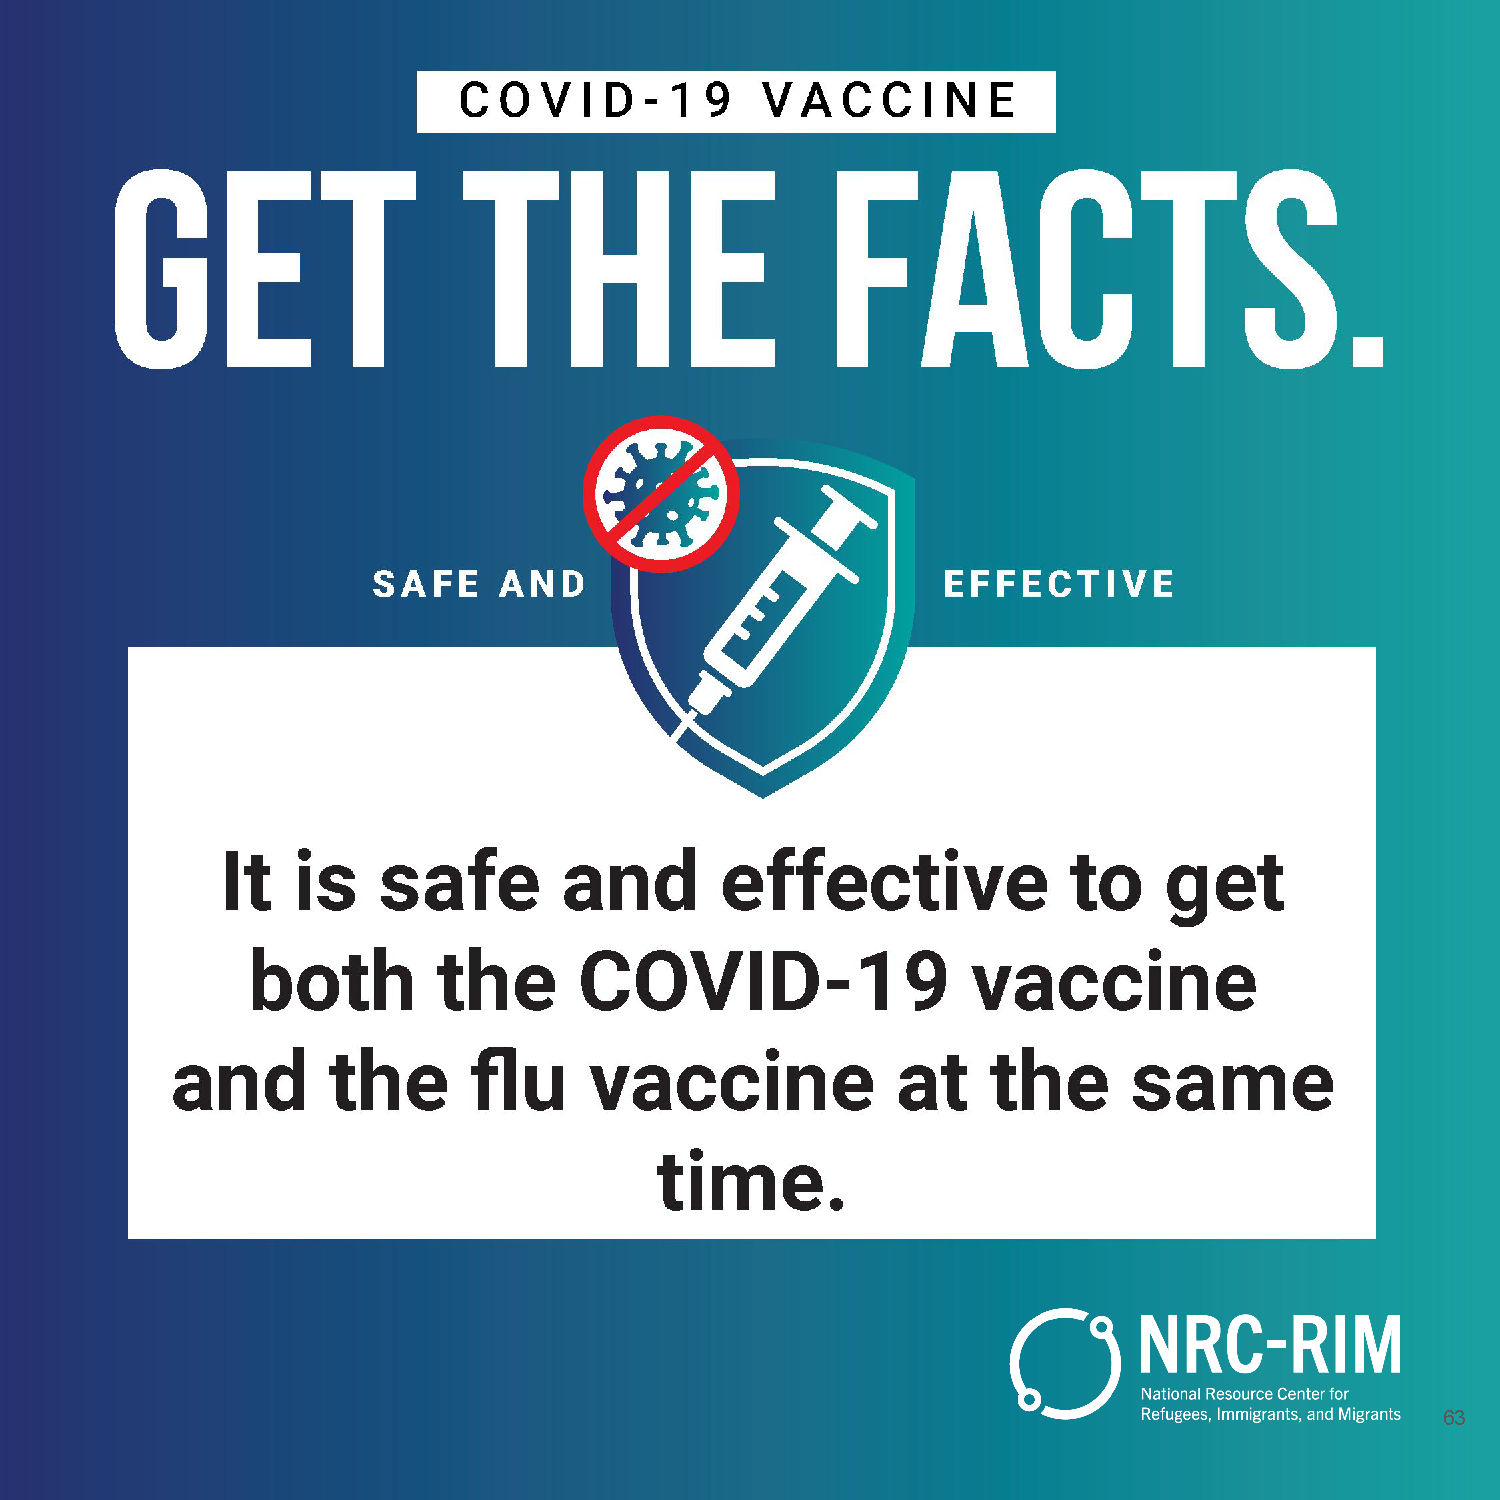 It is safe and effective to get both the COVID-19 vaccine and the flu vaccine at the same time